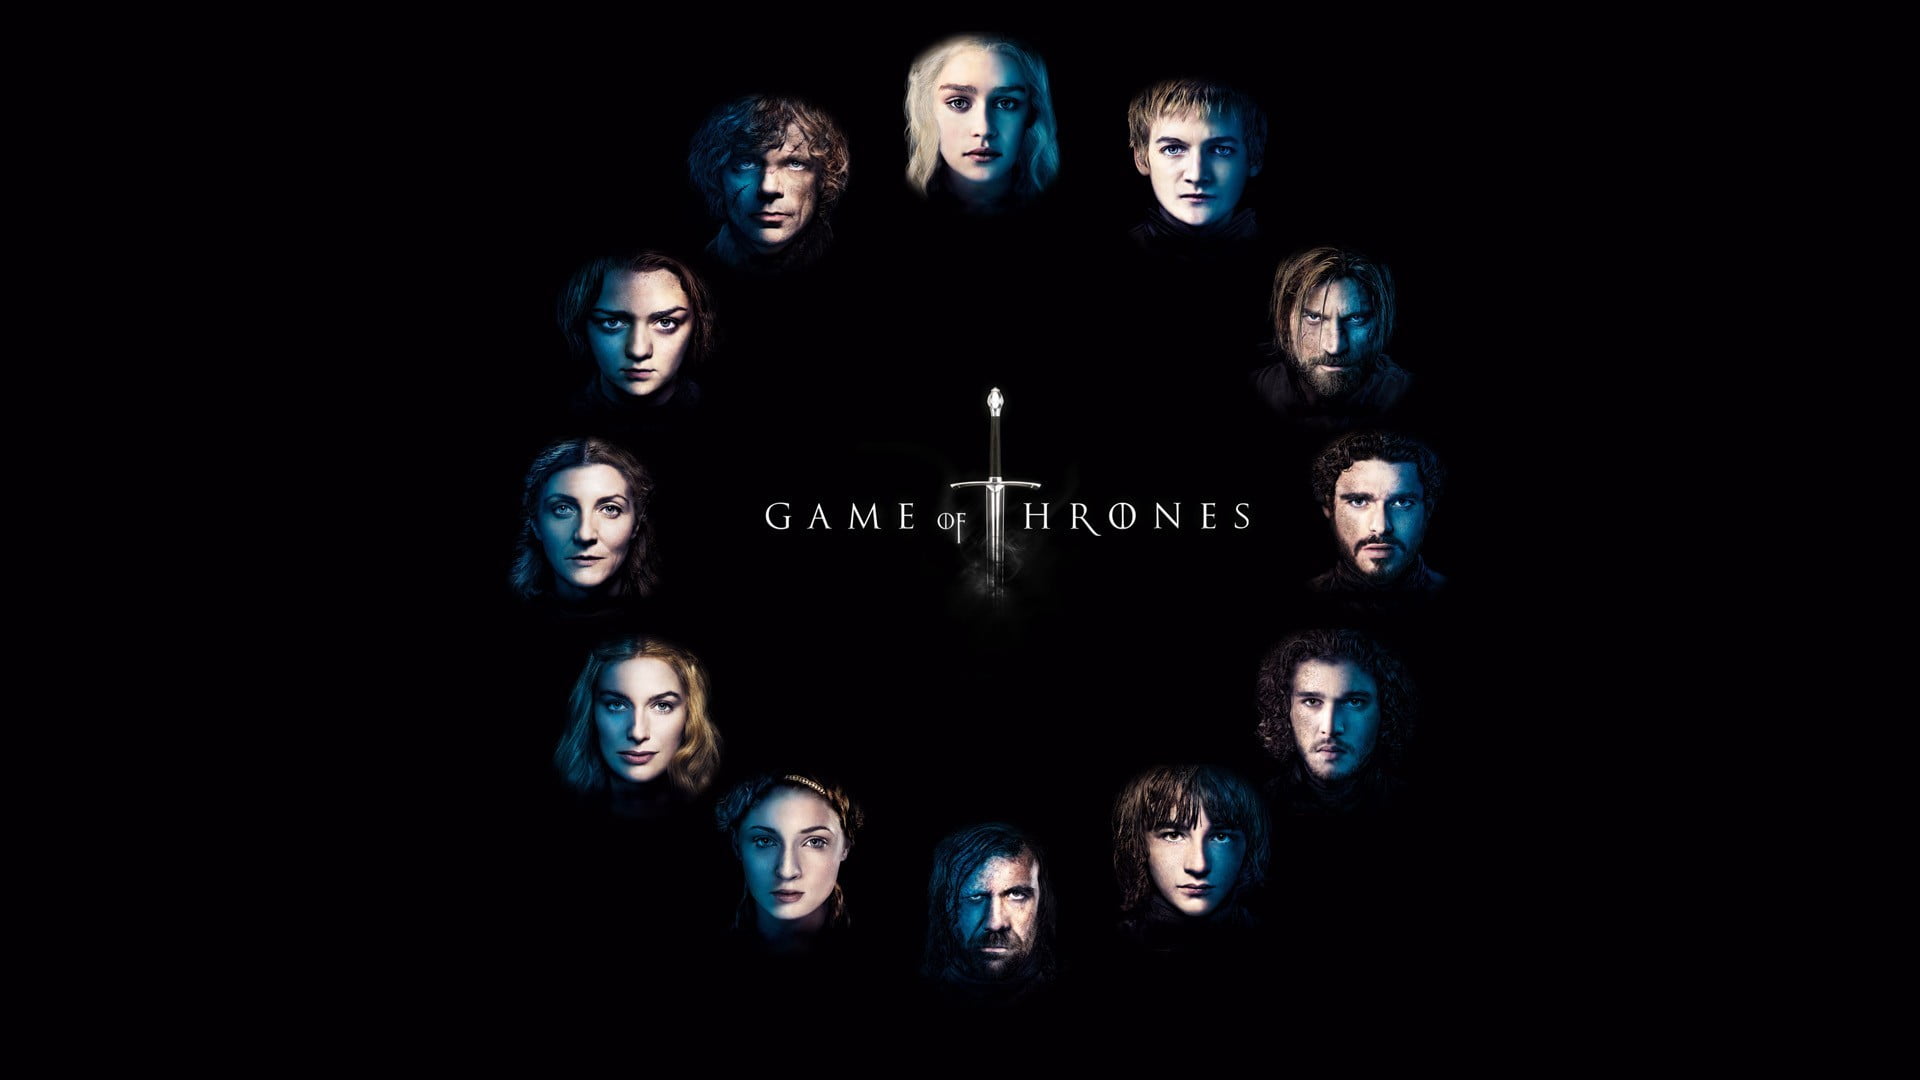 Game of Thrones wallpaper, Game of Thrones